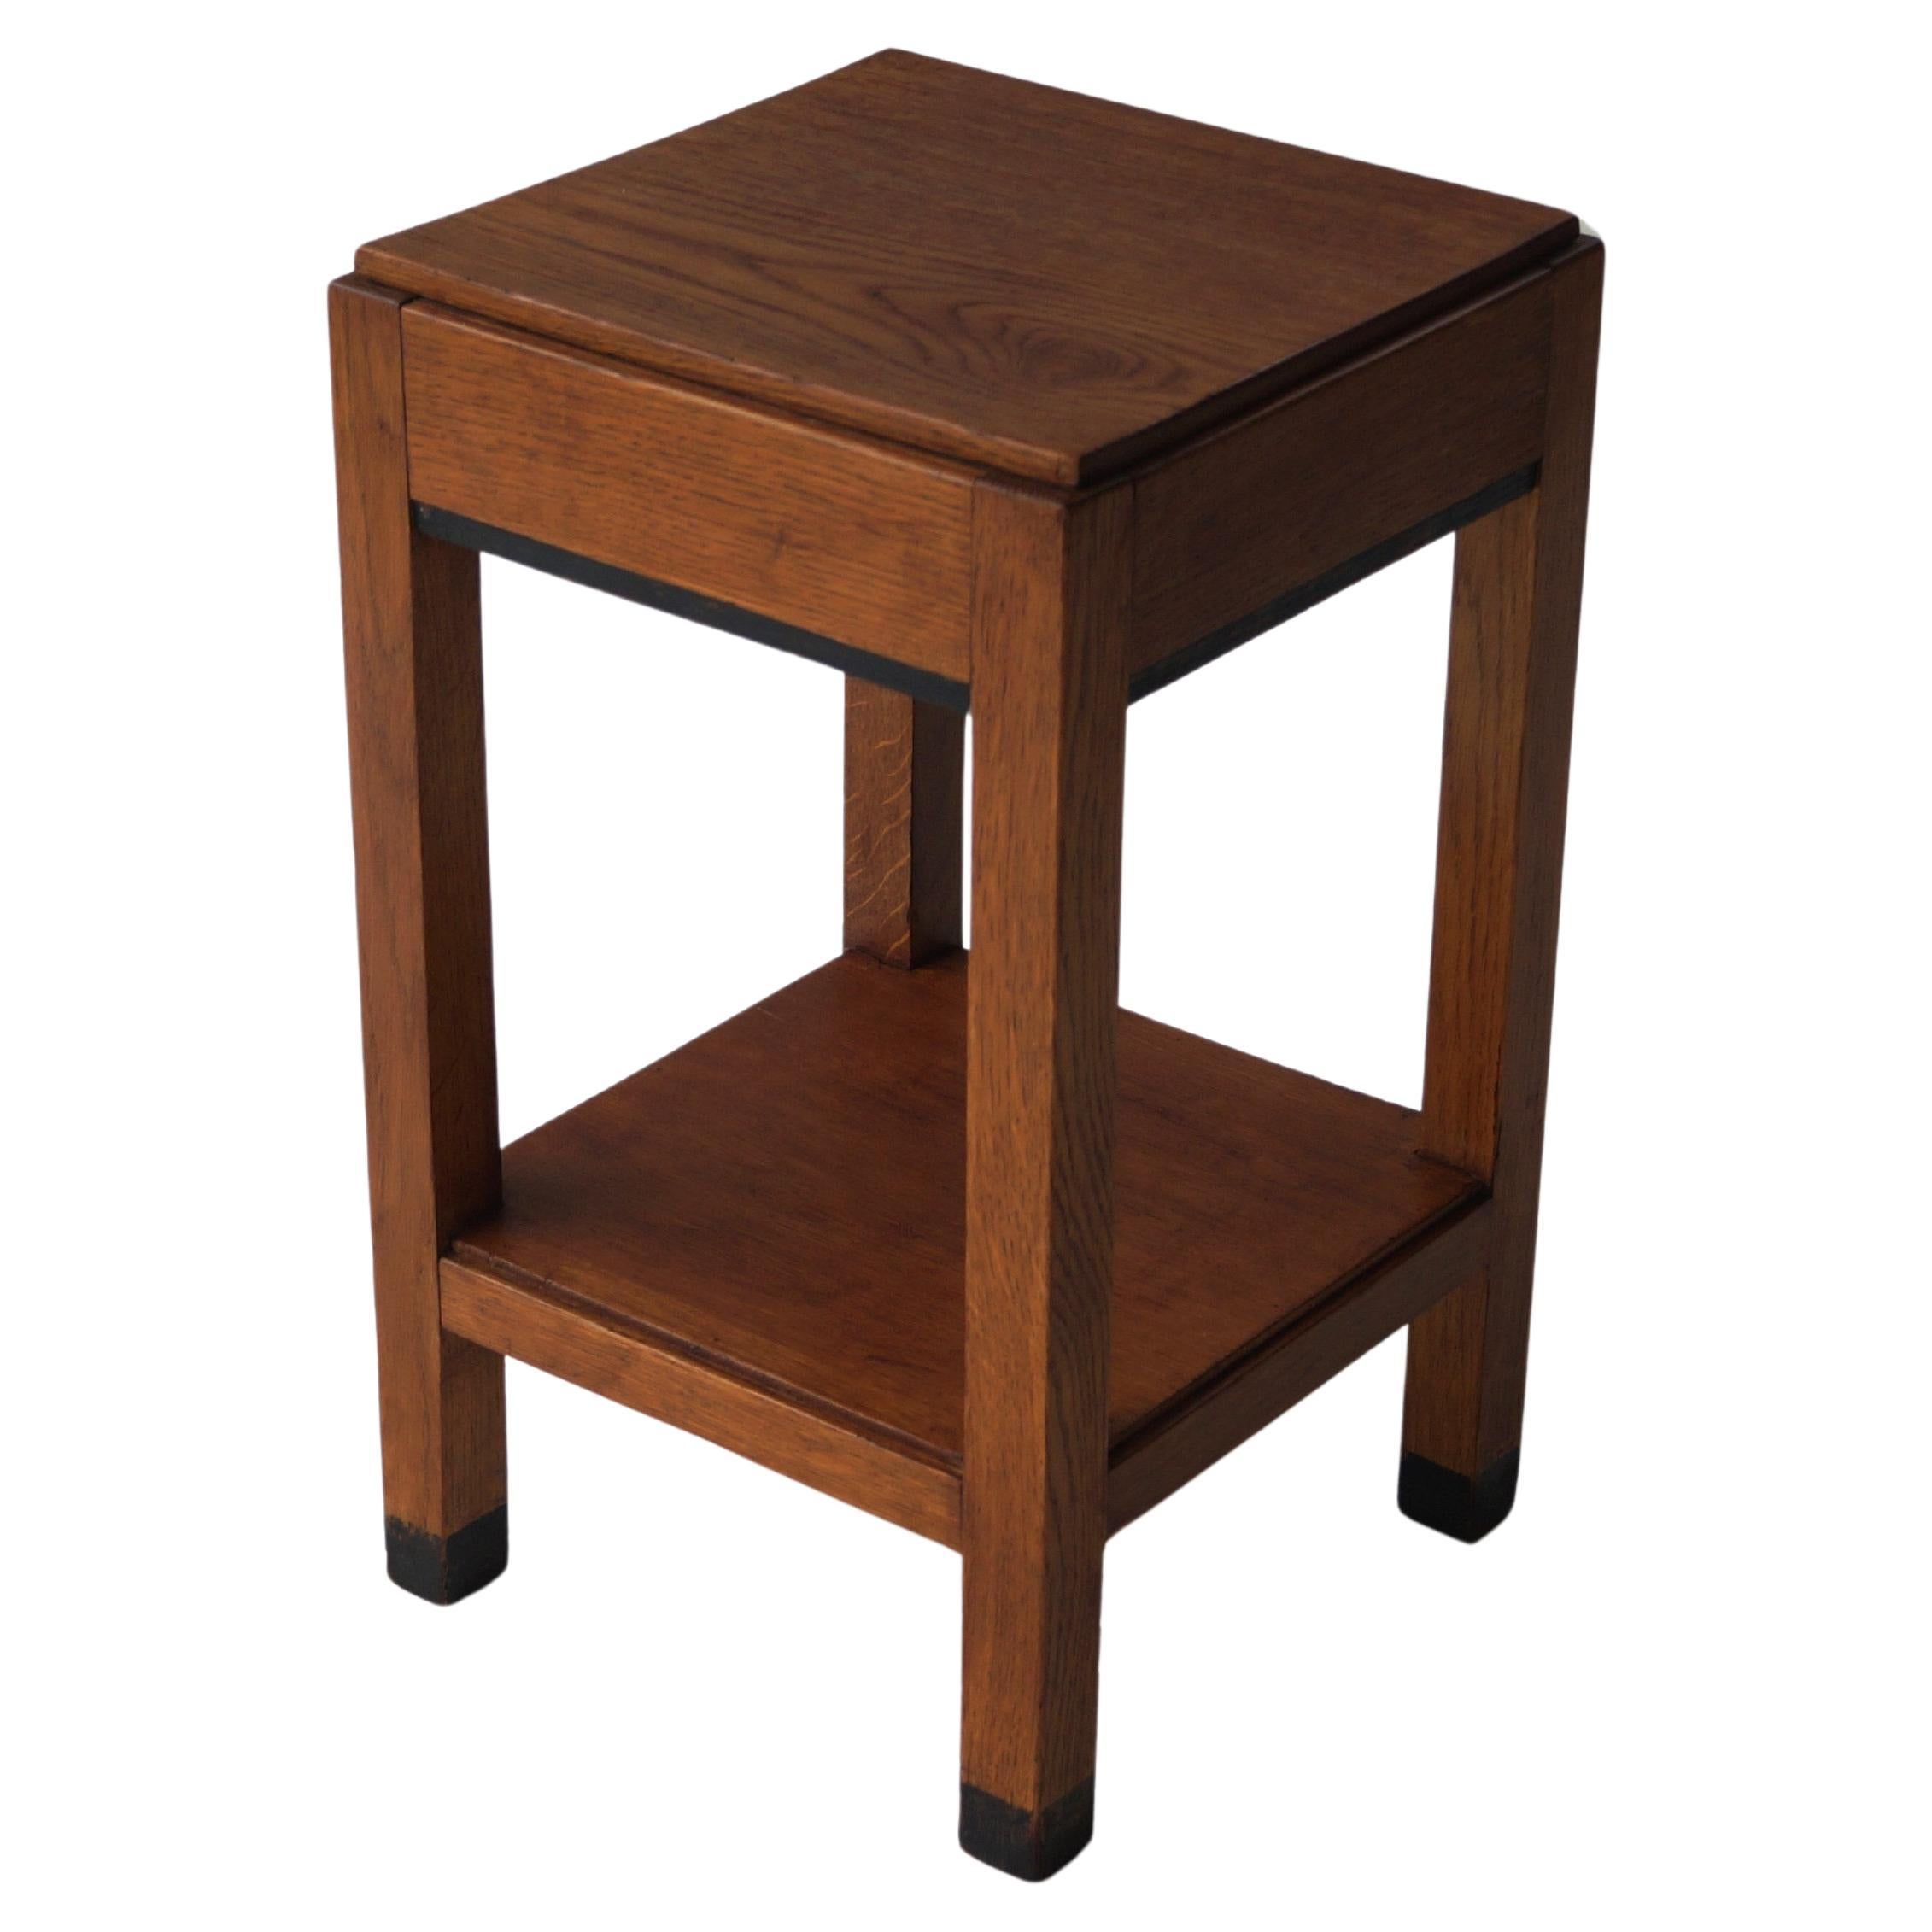 Dutch Art Deco Haagse School square side table, 1930s